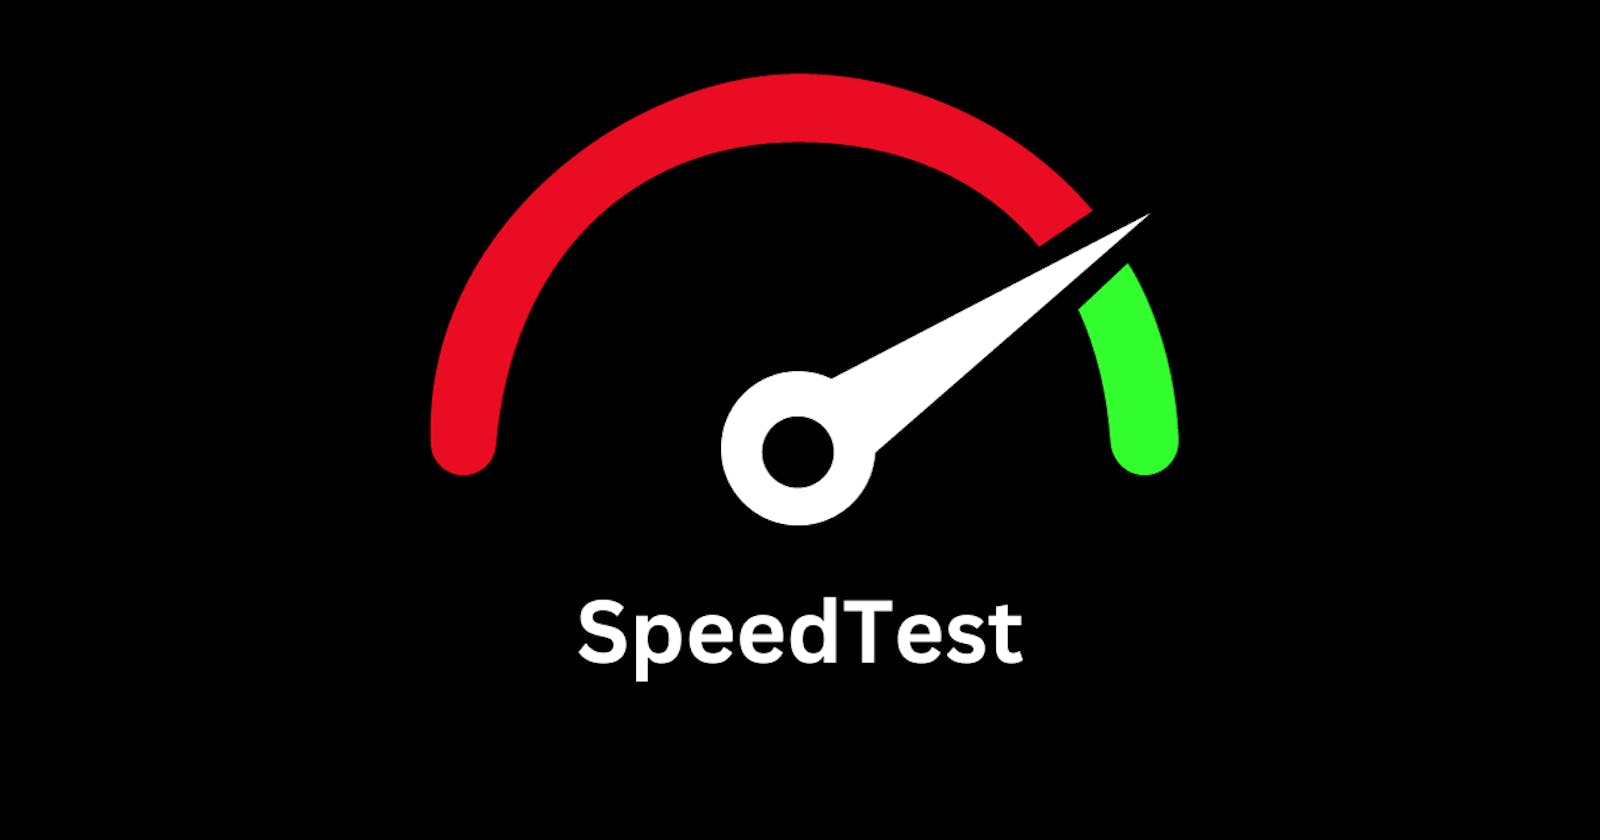 What Is a Good Jitter In Internet Speed Test?